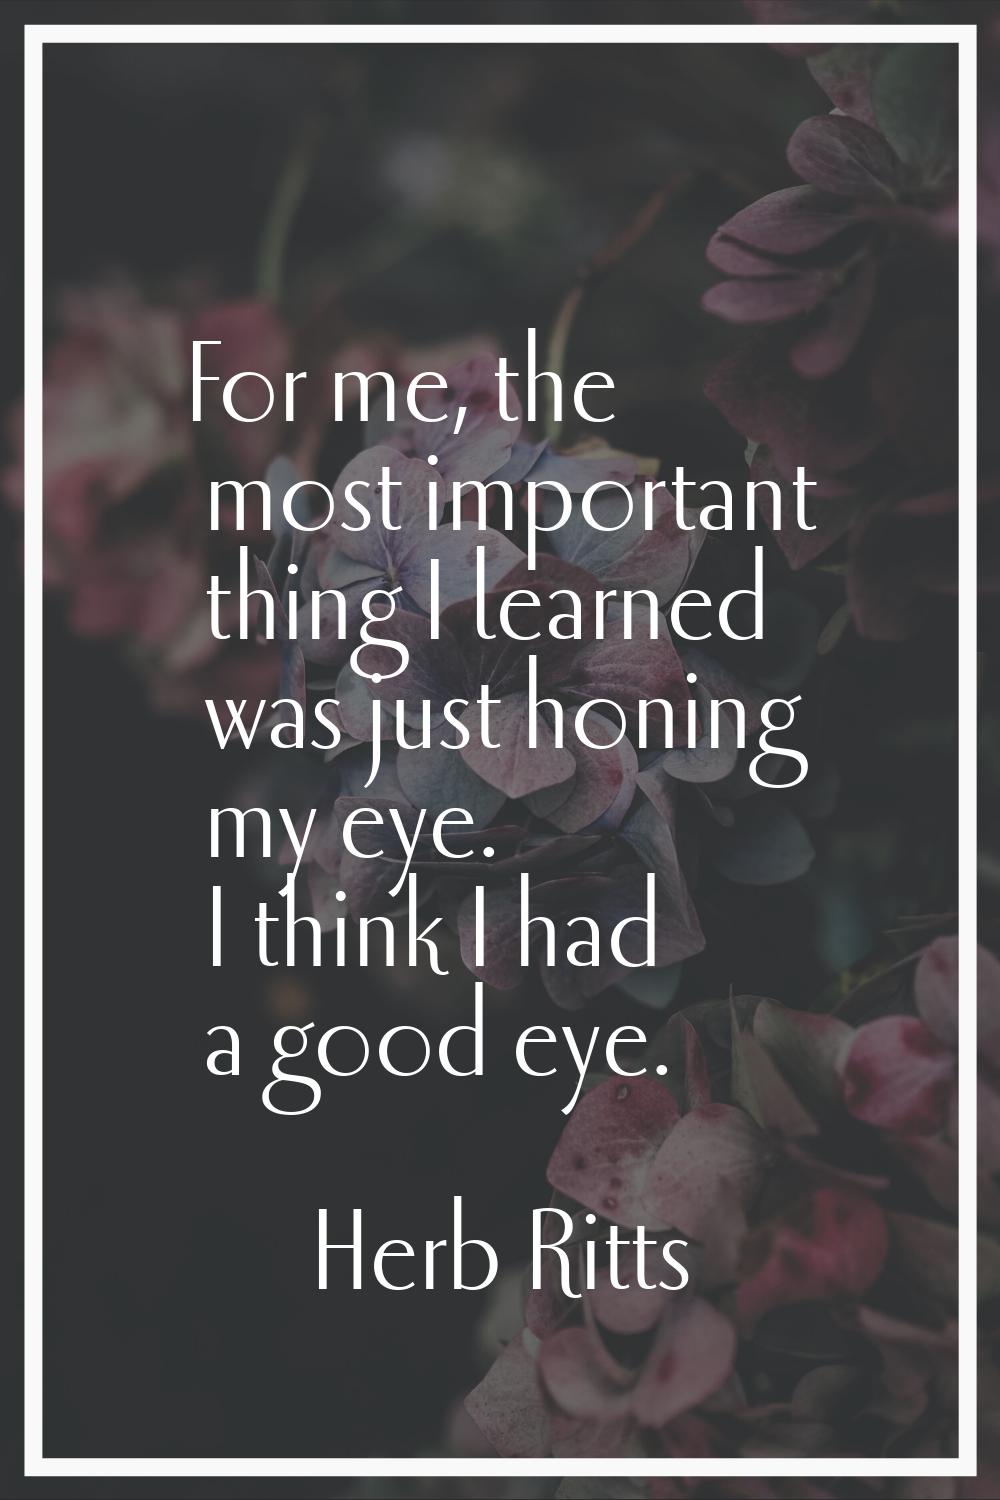 For me, the most important thing I learned was just honing my eye. I think I had a good eye.